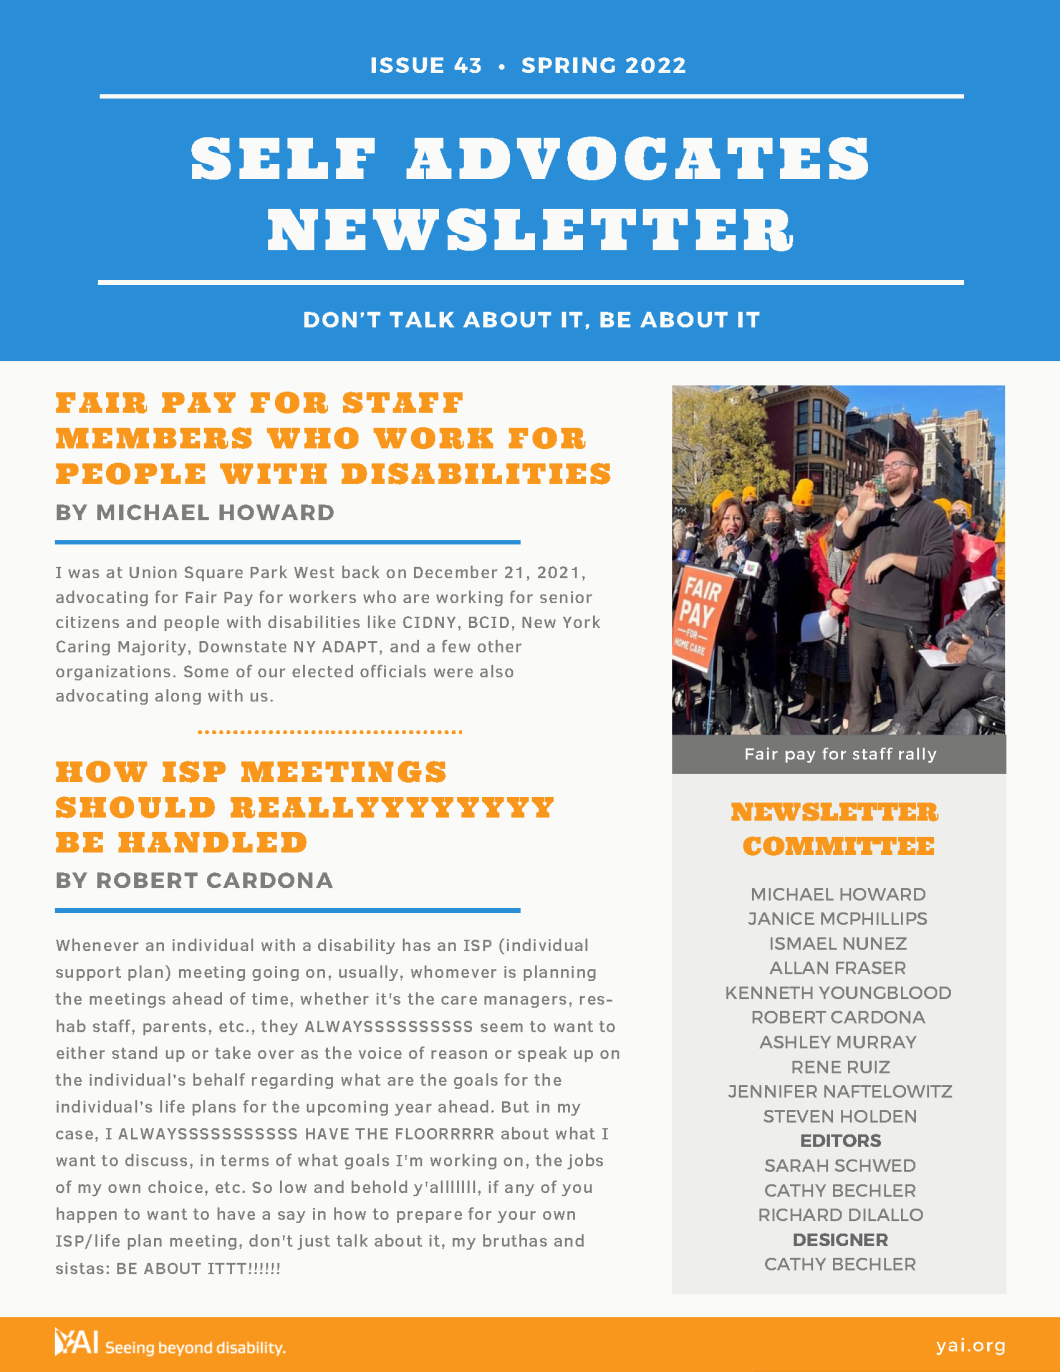 Front cover of the Spring 2022 Self Advocates Newsletter